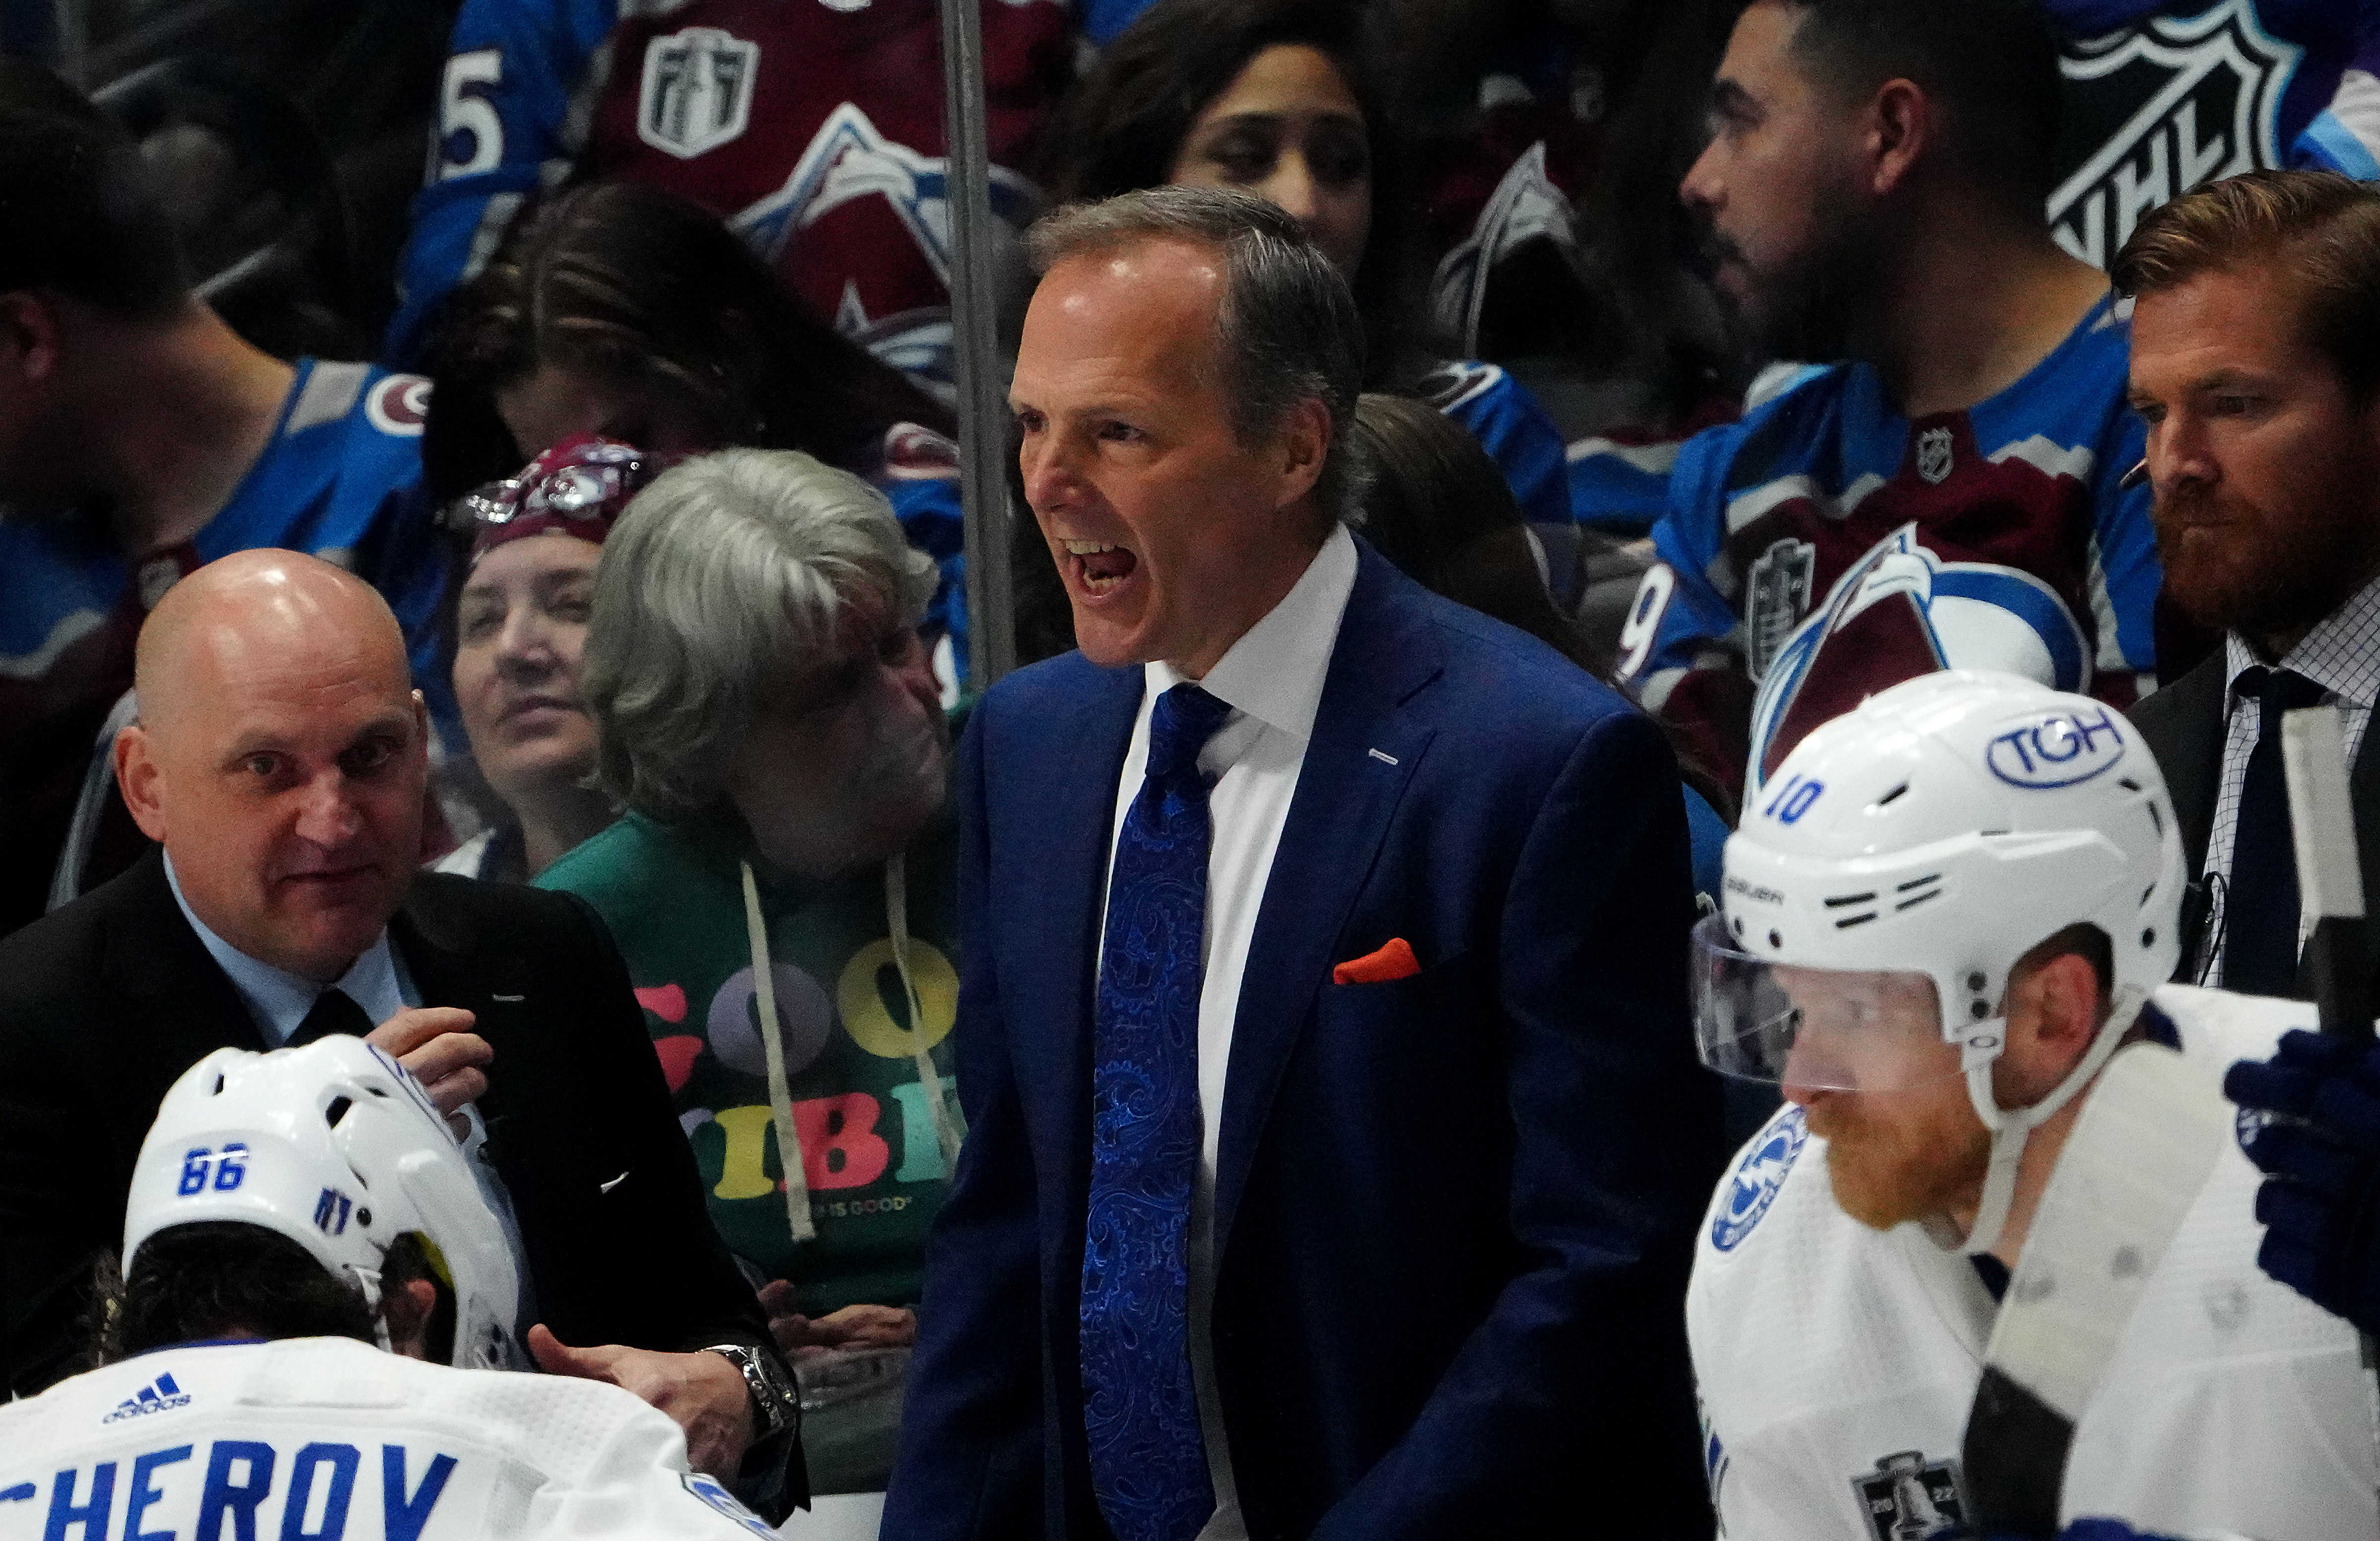 NHL: Stanley Cup Playoffs-Tampa Bay Lightning at Colorado Avalanche